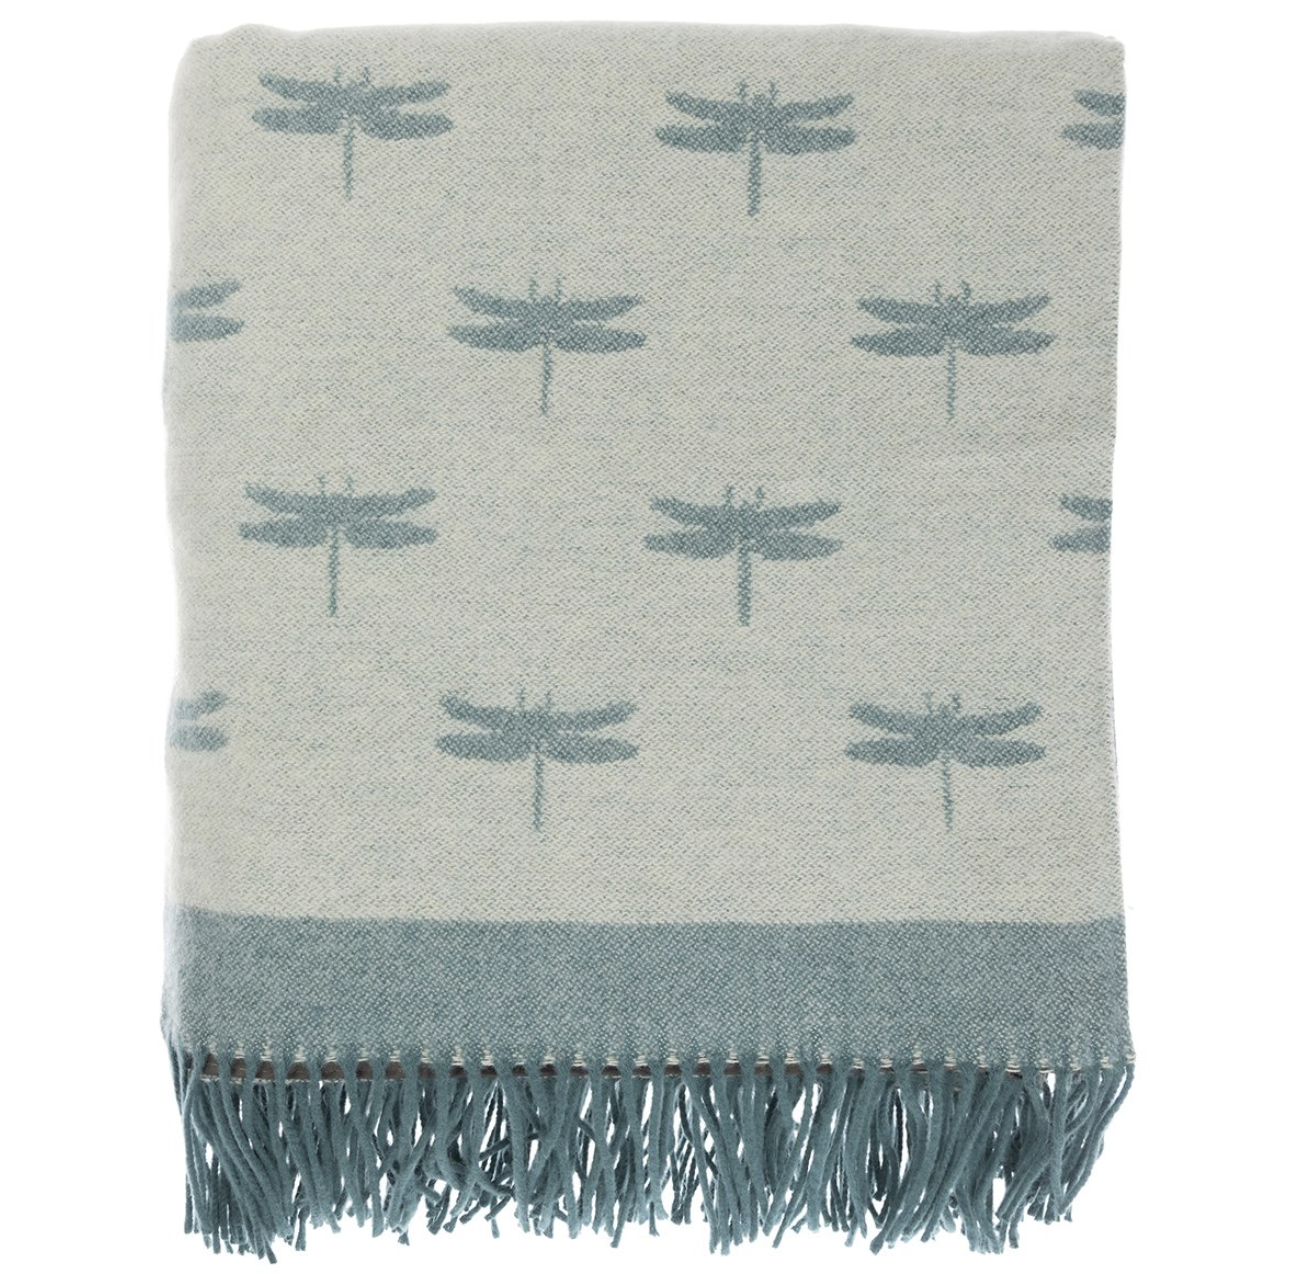 Sophie Allport Knitted Picnic Blanket Dragonfly, Dusty Blue